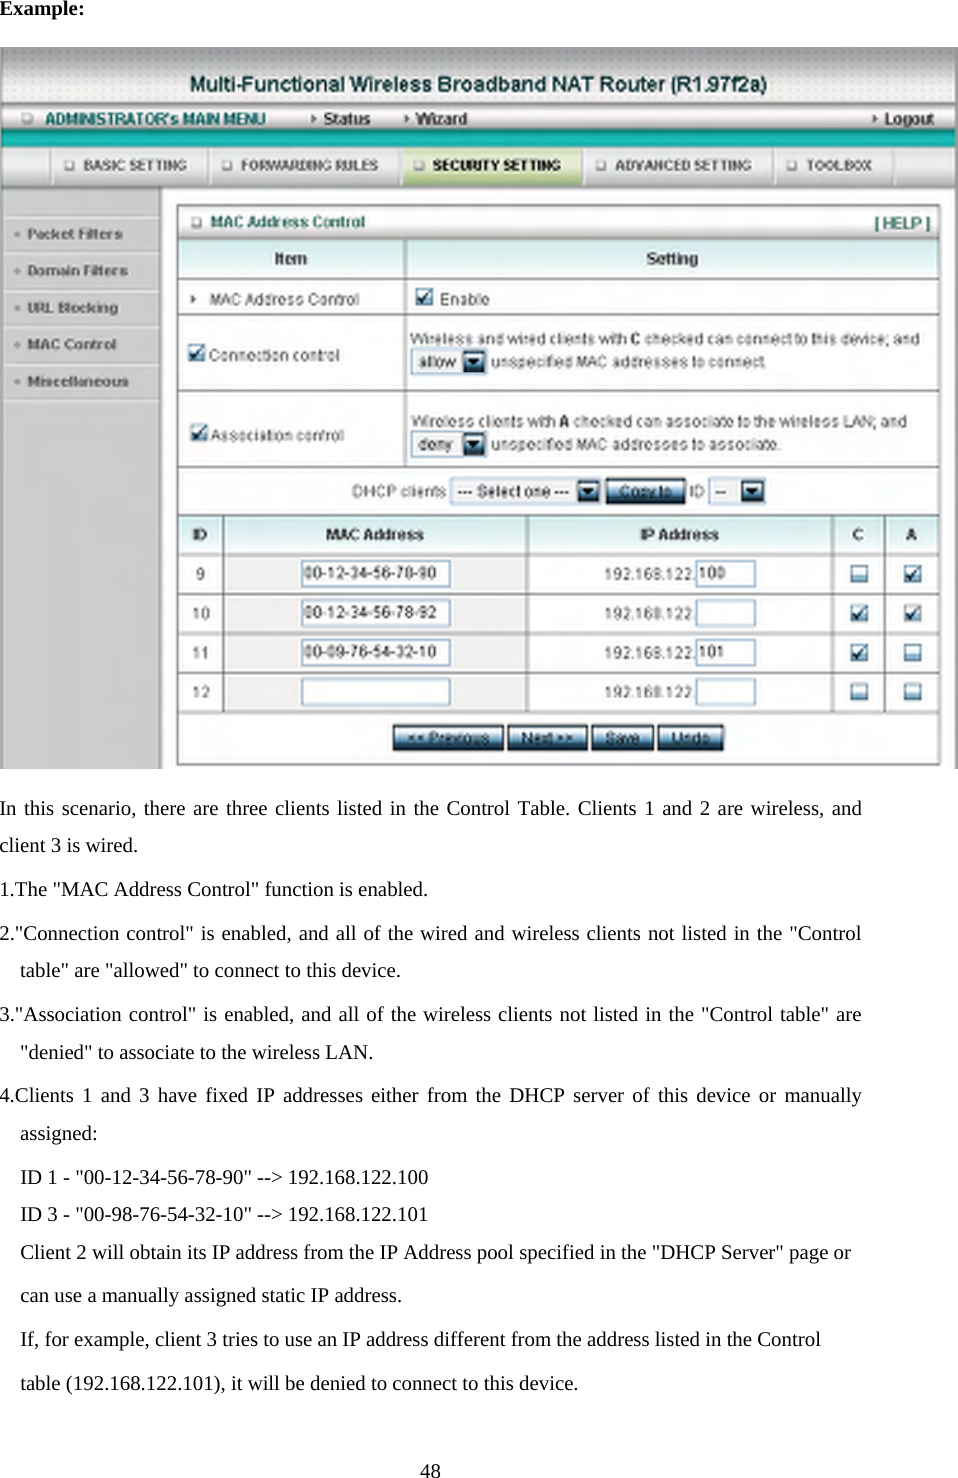 Example:  In this scenario, there are three clients listed in the Control Table. Clients 1 and 2 are wireless, and client 3 is wired.   1.The &quot;MAC Address Control&quot; function is enabled.   2.&quot;Connection control&quot; is enabled, and all of the wired and wireless clients not listed in the &quot;Control table&quot; are &quot;allowed&quot; to connect to this device.   3.&quot;Association control&quot; is enabled, and all of the wireless clients not listed in the &quot;Control table&quot; are &quot;denied&quot; to associate to the wireless LAN.   4.Clients 1 and 3 have fixed IP addresses either from the DHCP server of this device or manually assigned: ID 1 - &quot;00-12-34-56-78-90&quot; --&gt; 192.168.122.100 ID 3 - &quot;00-98-76-54-32-10&quot; --&gt; 192.168.122.101 Client 2 will obtain its IP address from the IP Address pool specified in the &quot;DHCP Server&quot; page or   can use a manually assigned static IP address. If, for example, client 3 tries to use an IP address different from the address listed in the Control   table (192.168.122.101), it will be denied to connect to this device.    48